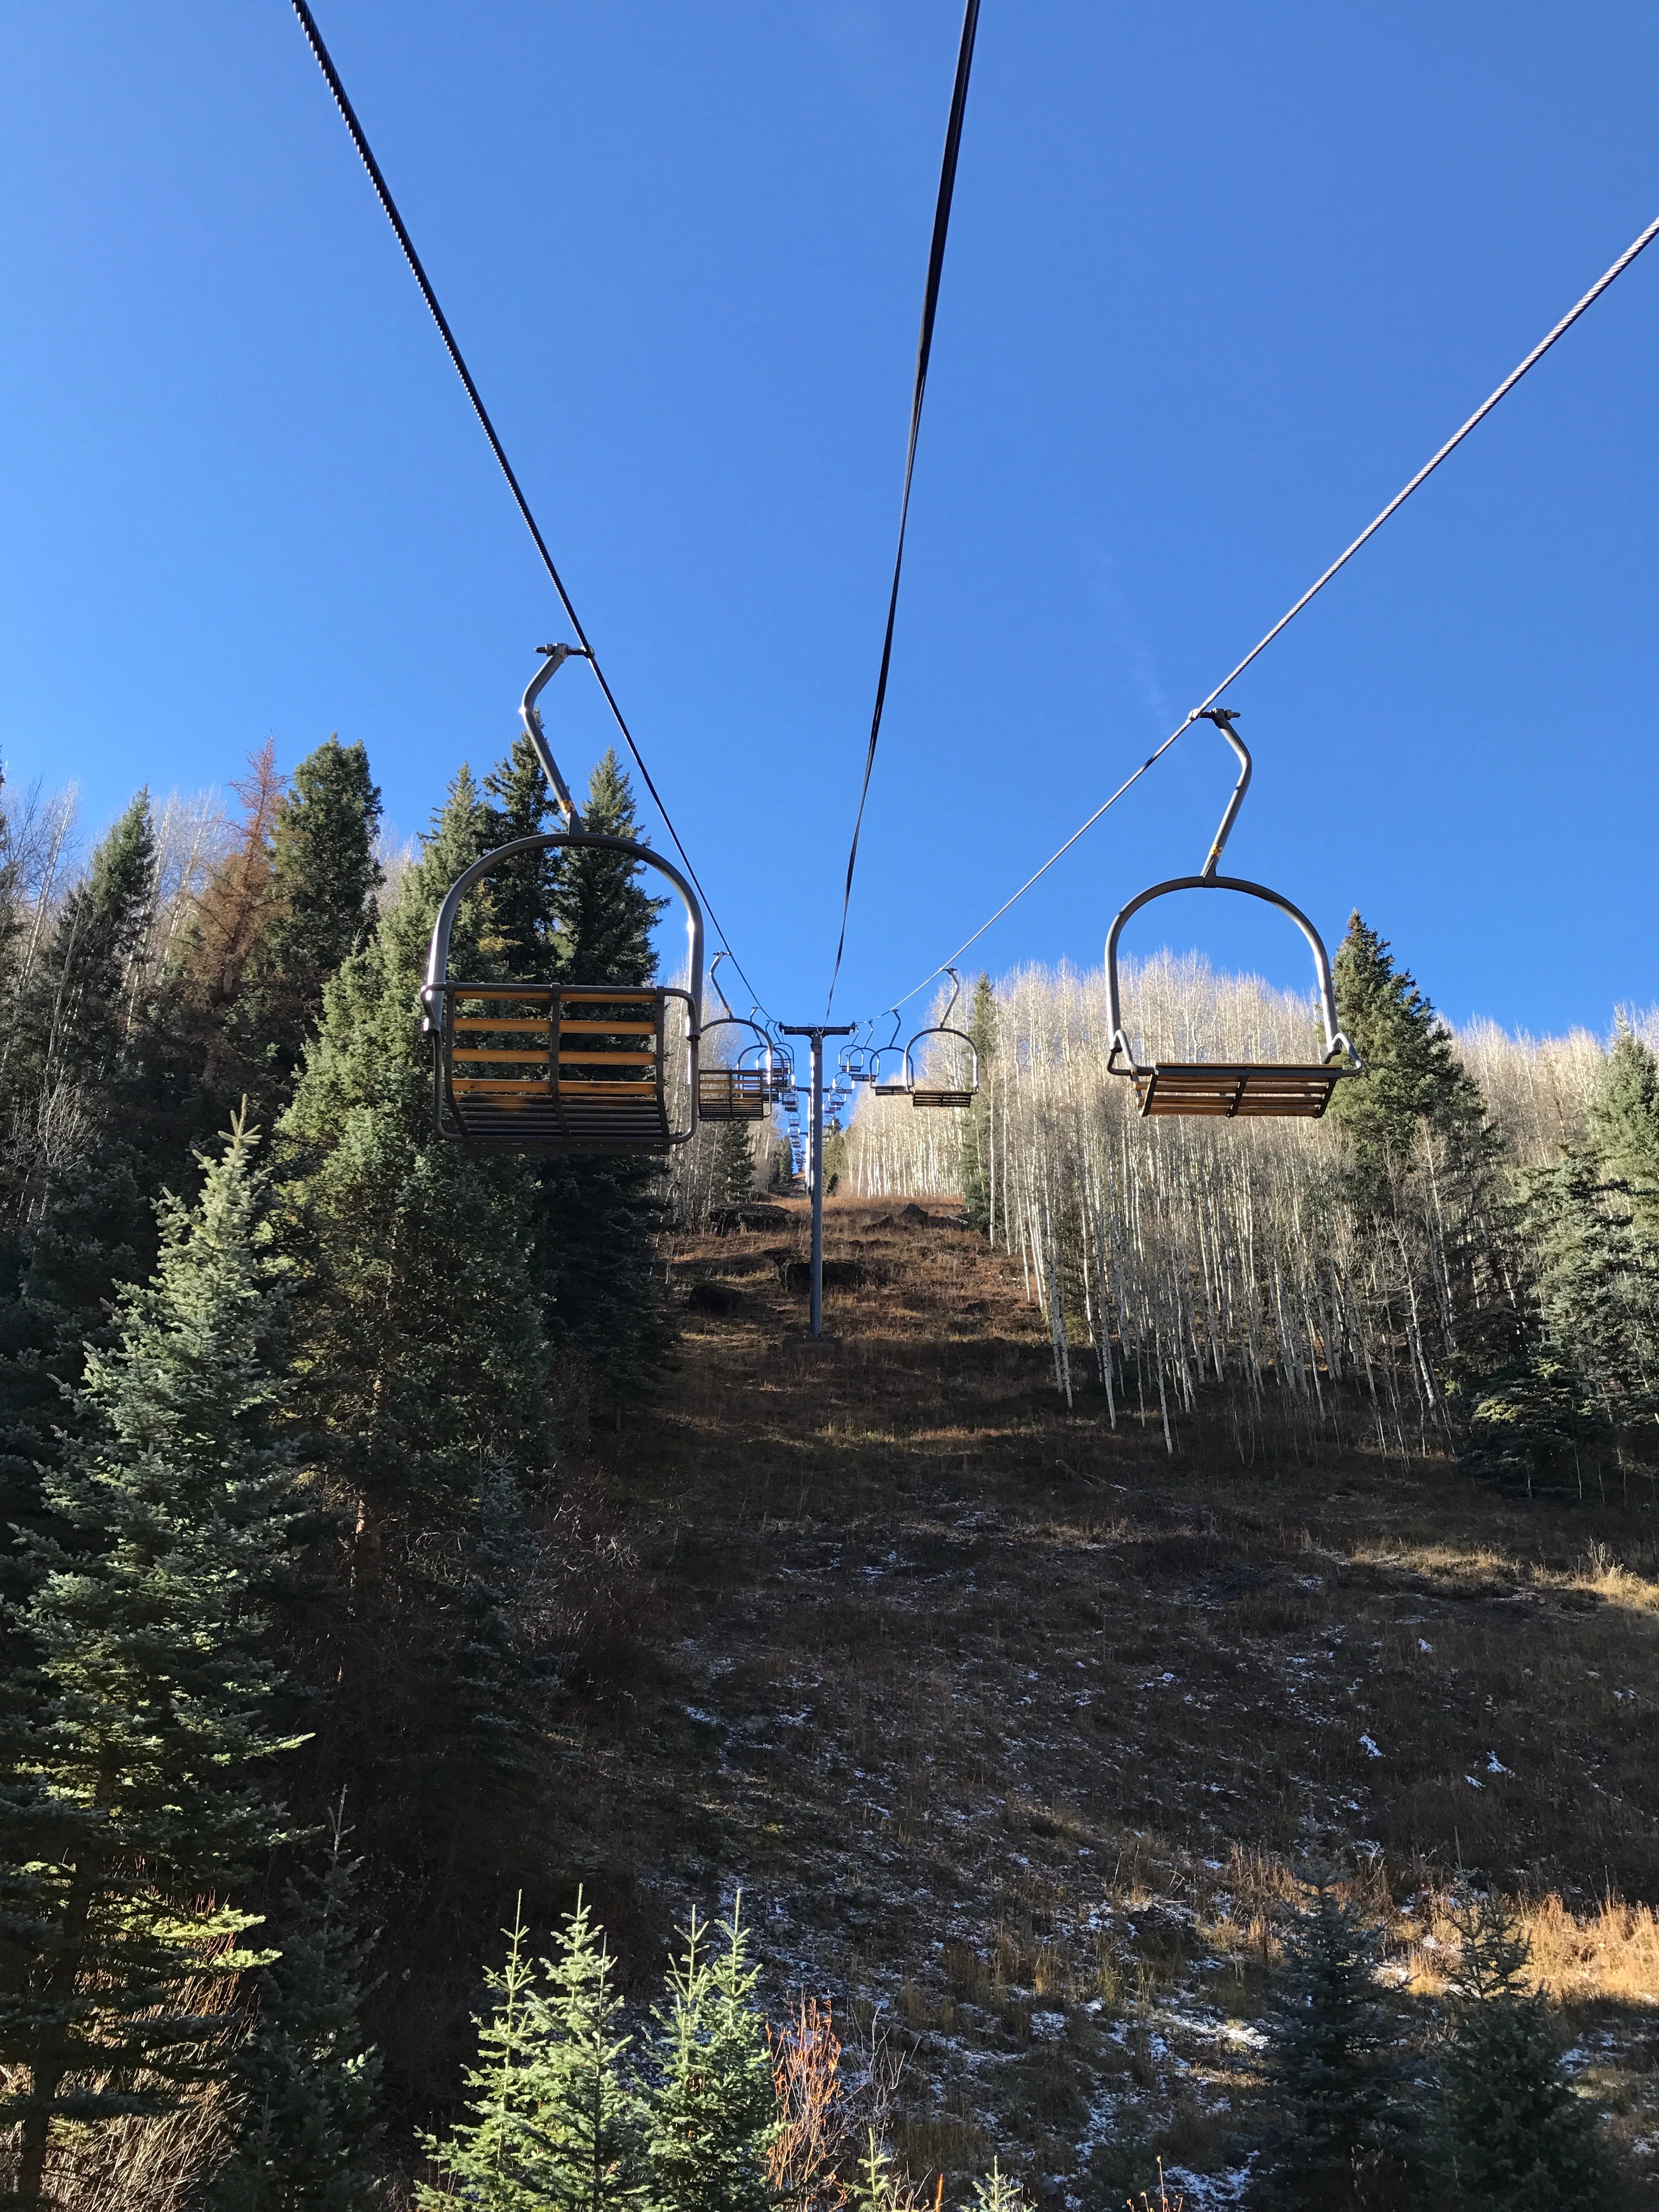 busy season in town has not yet begun so the lifts sit vacant and not yet running all the while the campground busy season is starting to come to a close